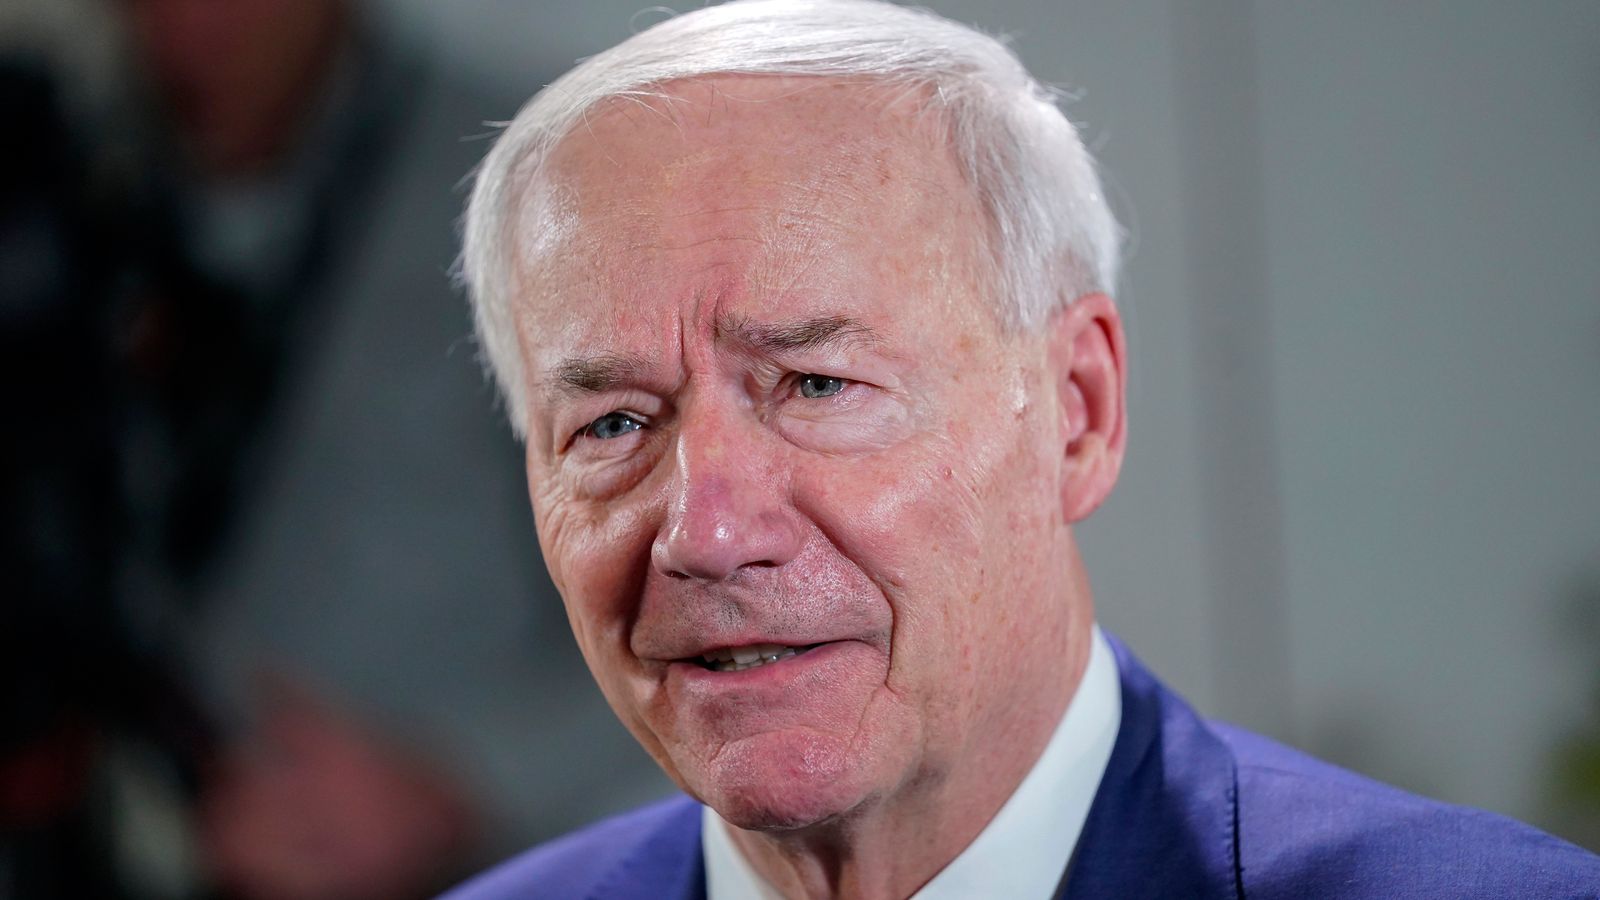 Asa Hutchinson to take on Trump: Former Arkansas governor announces he will run for president